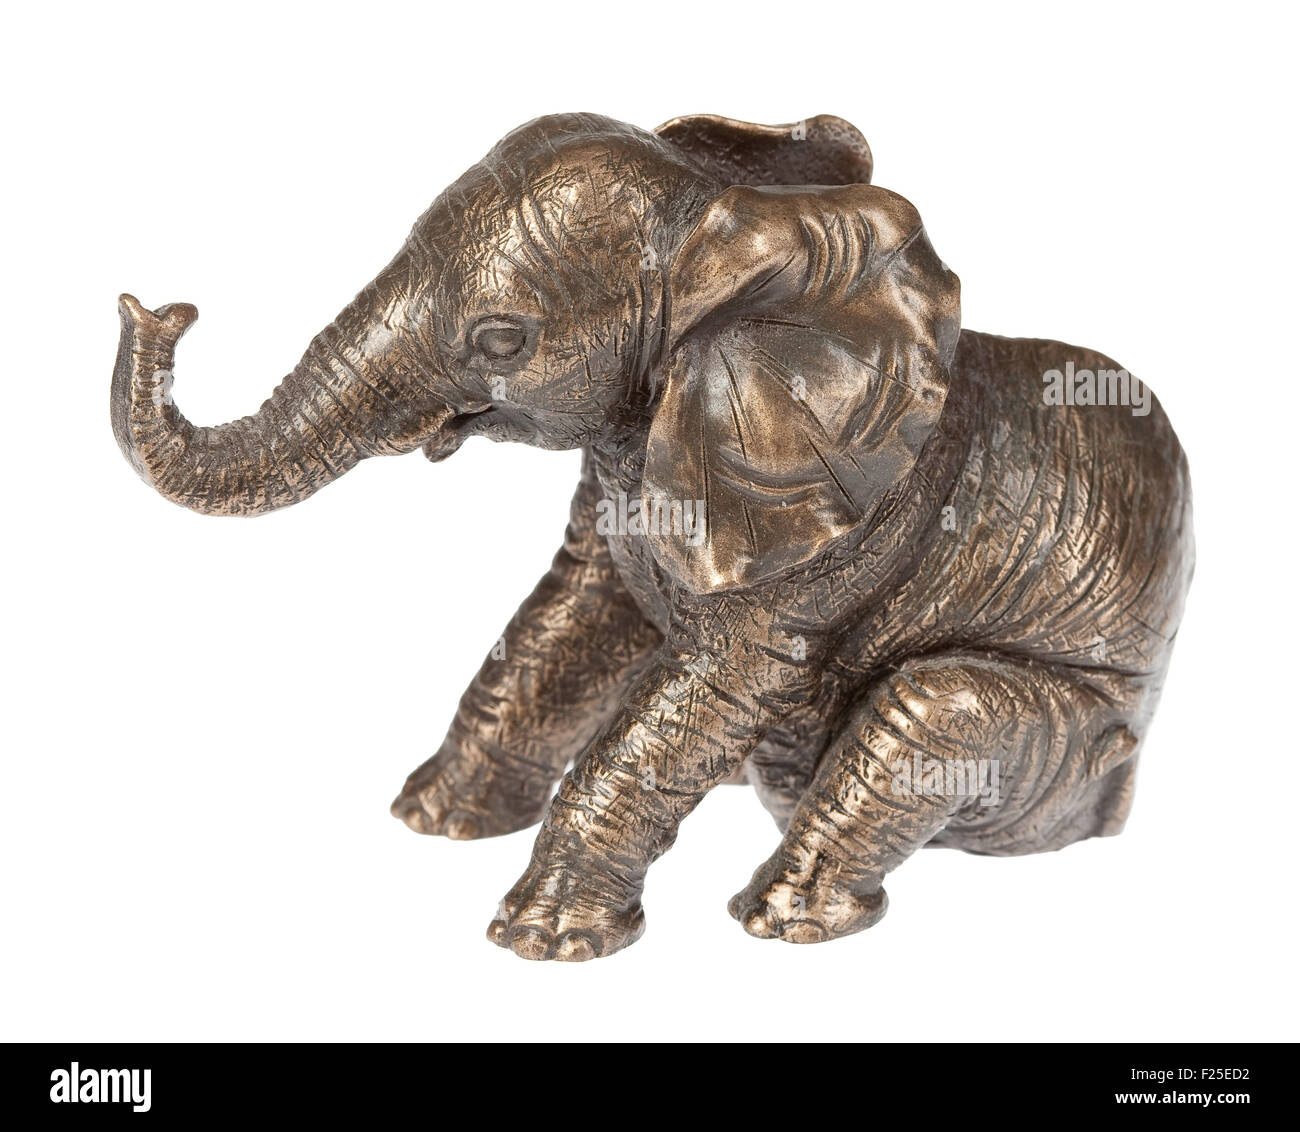 elephant animal statuette culture folk lifestyle art tradition traditional carving sculpture isolated object background light Stock Photo